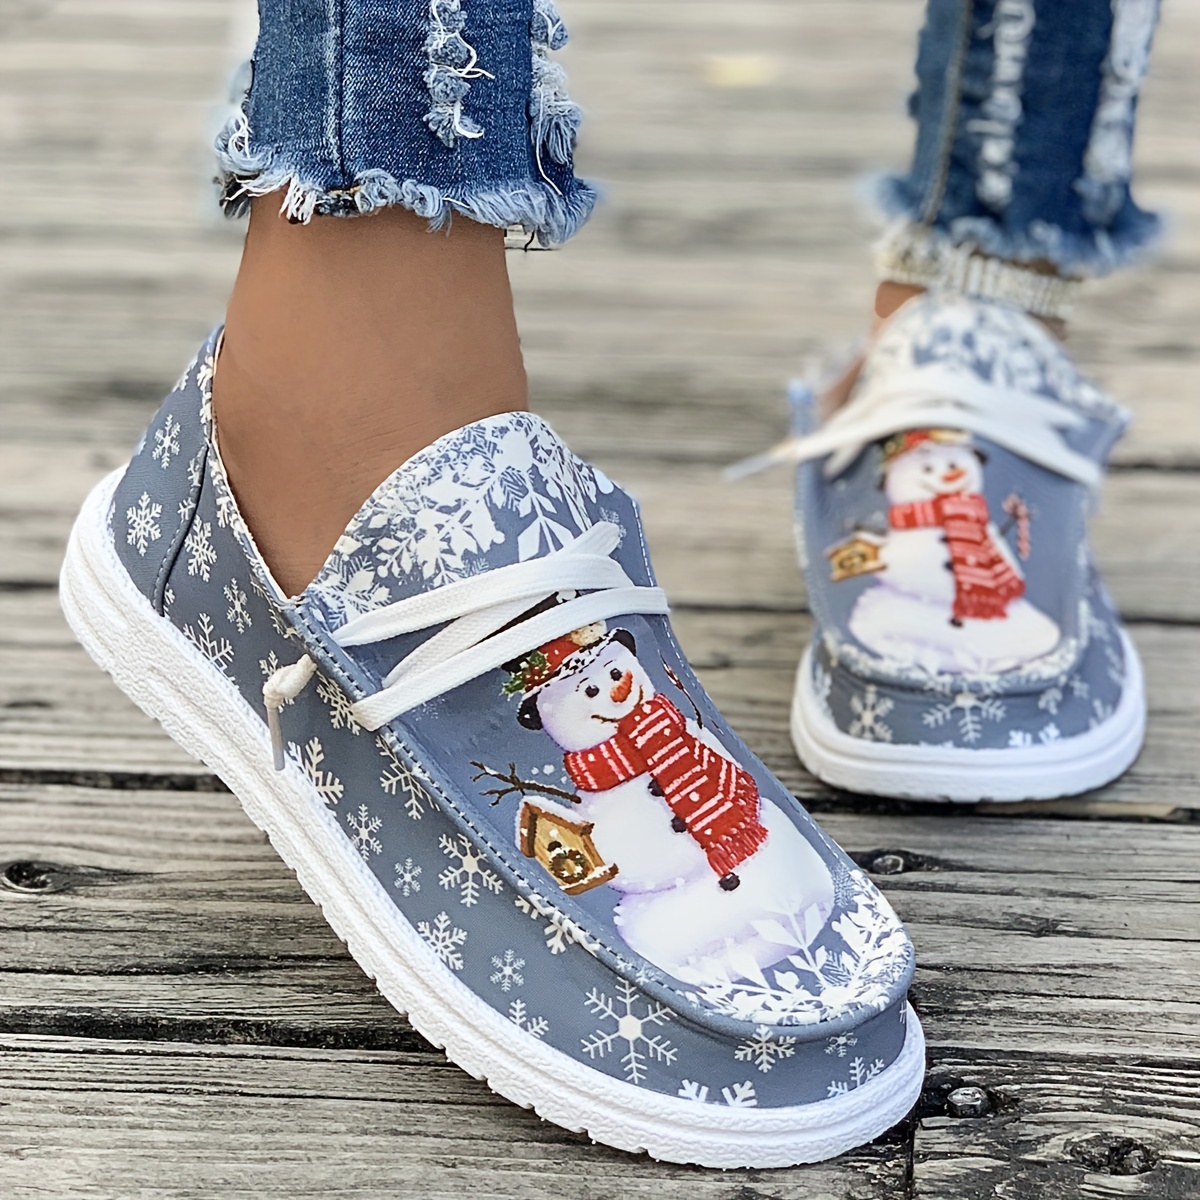 

Women's Fashion Christmas Skate Shoes With Snowmen And Snowflakes Embellished Upper, Lace-up Light Flat Canvas Shoes